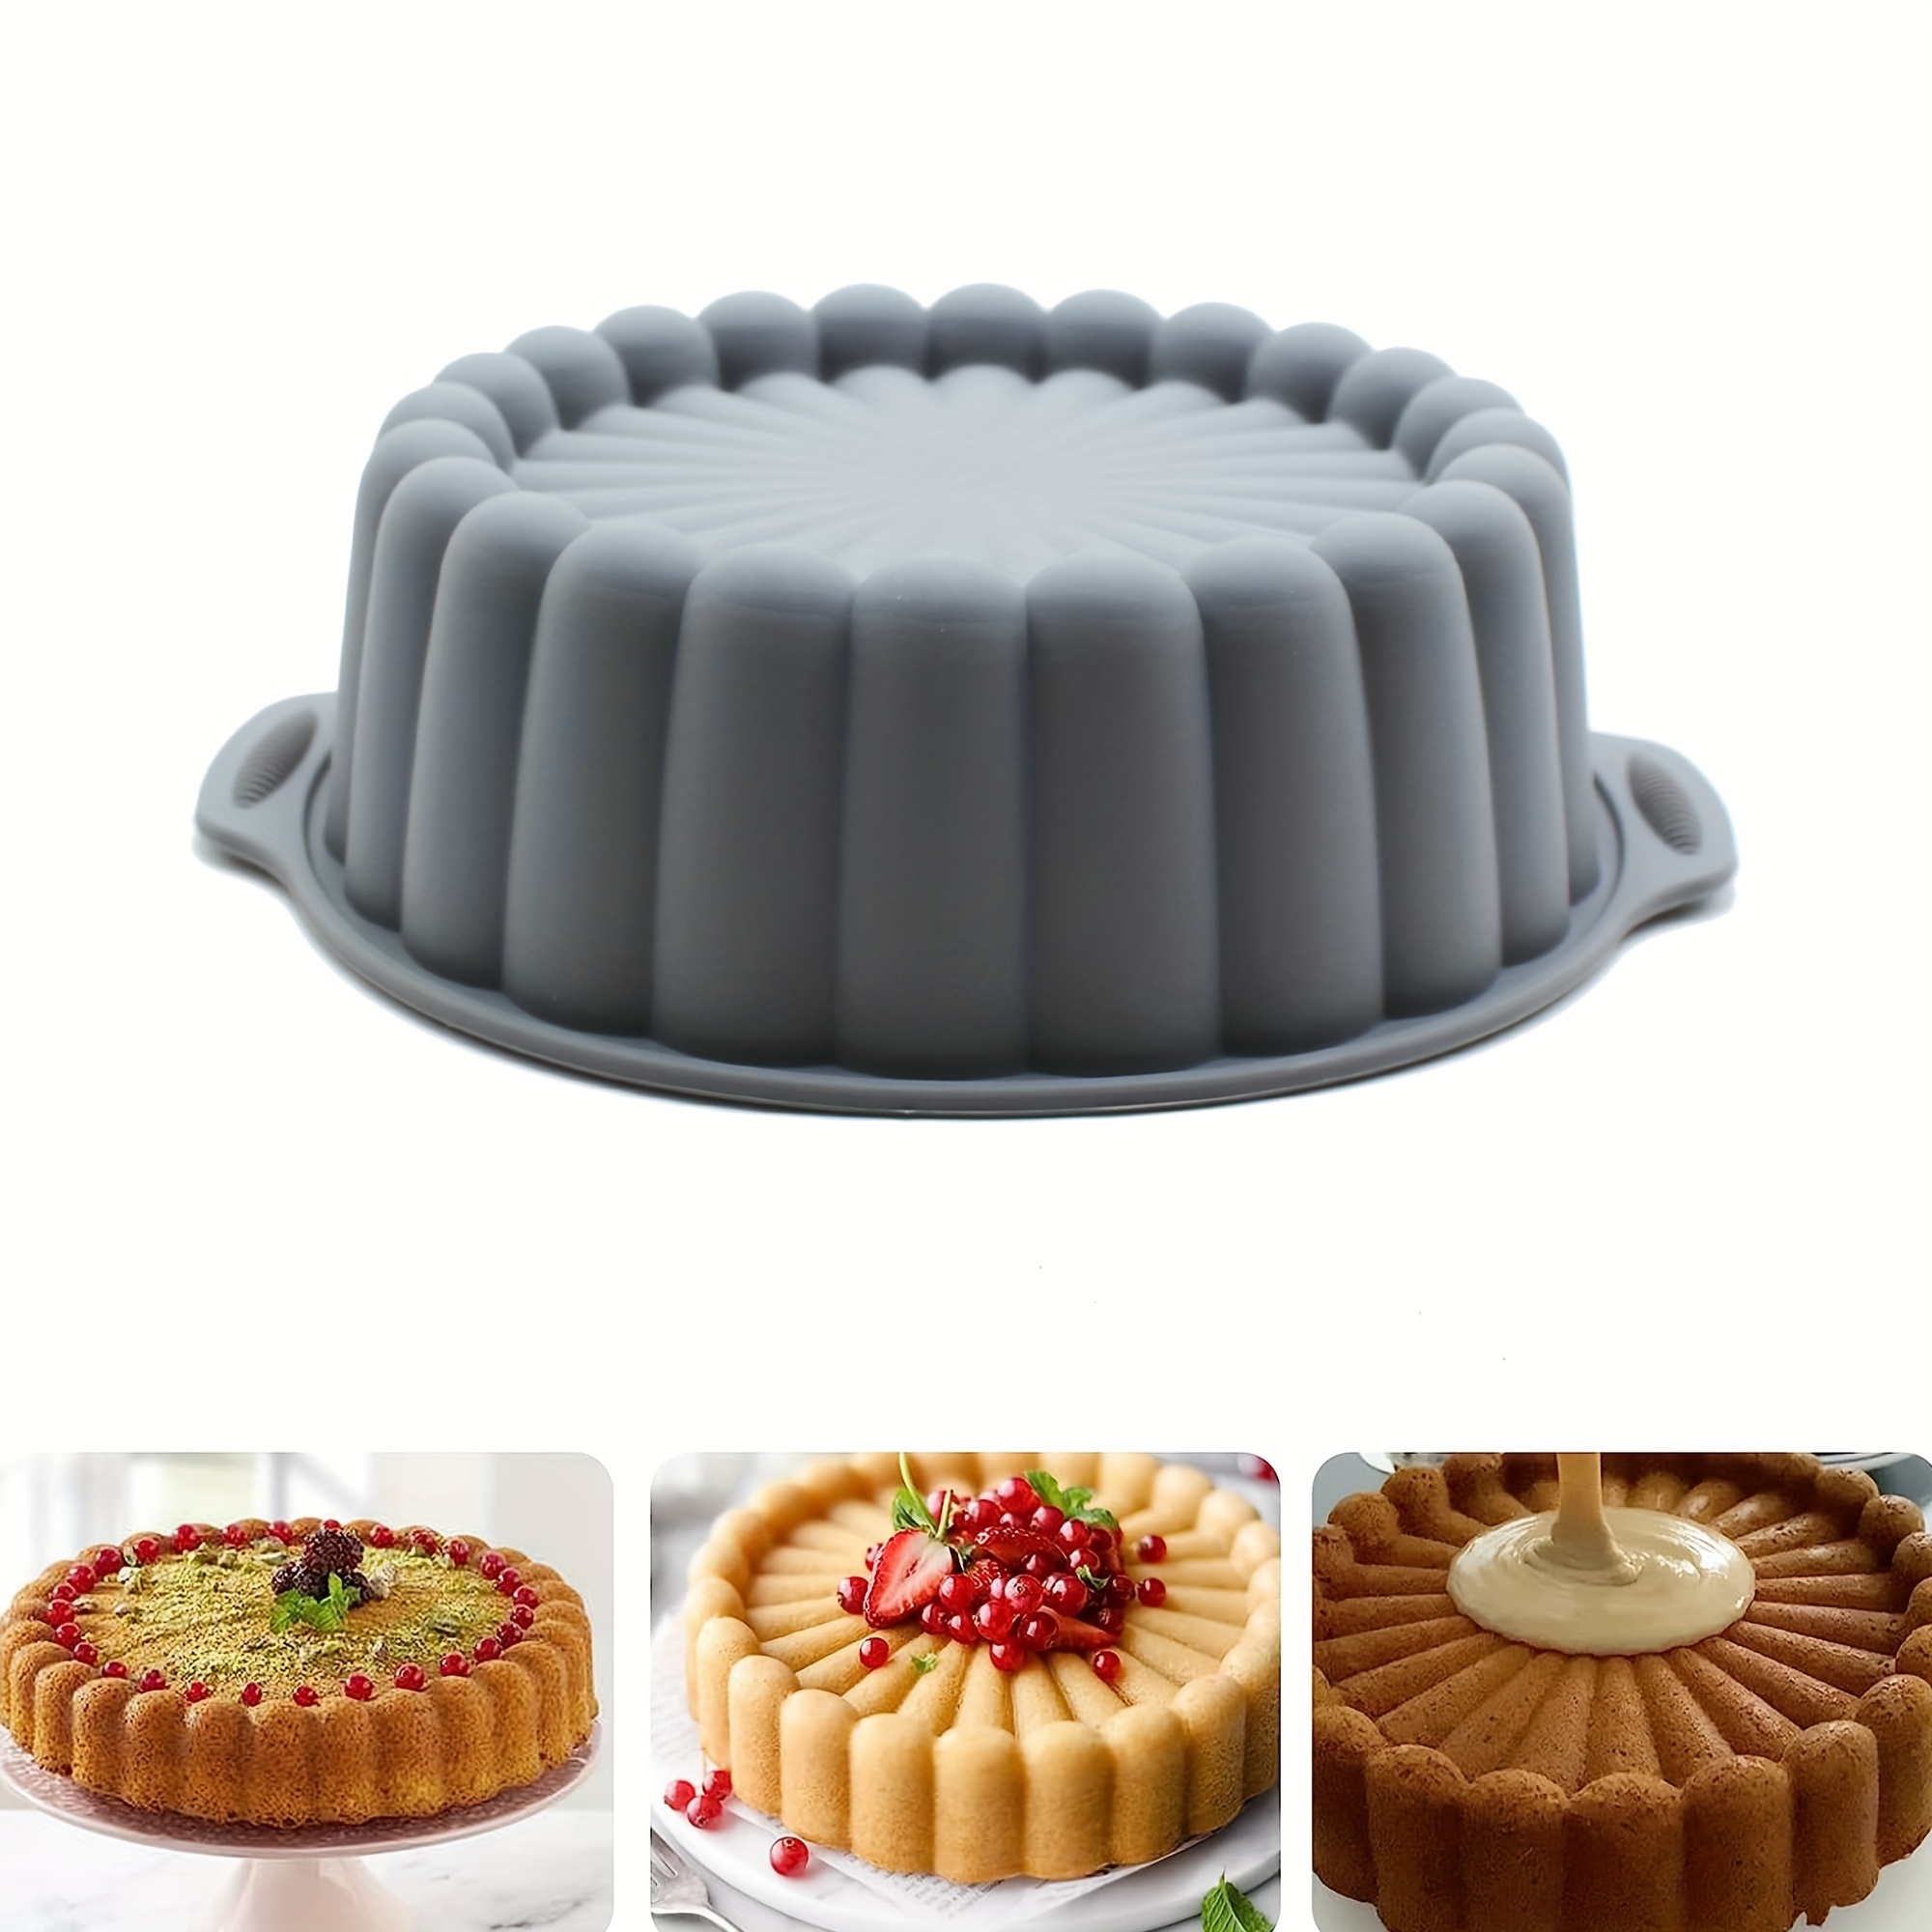 1pc/2pcs, Charlotte Cake Pan Silicone, Nonstick, 8 Inch Round Cake Molds  For Baking, 3D Flower Shaped Charlotte Cake Pan, Exclusive & Novelty Cake  Pan